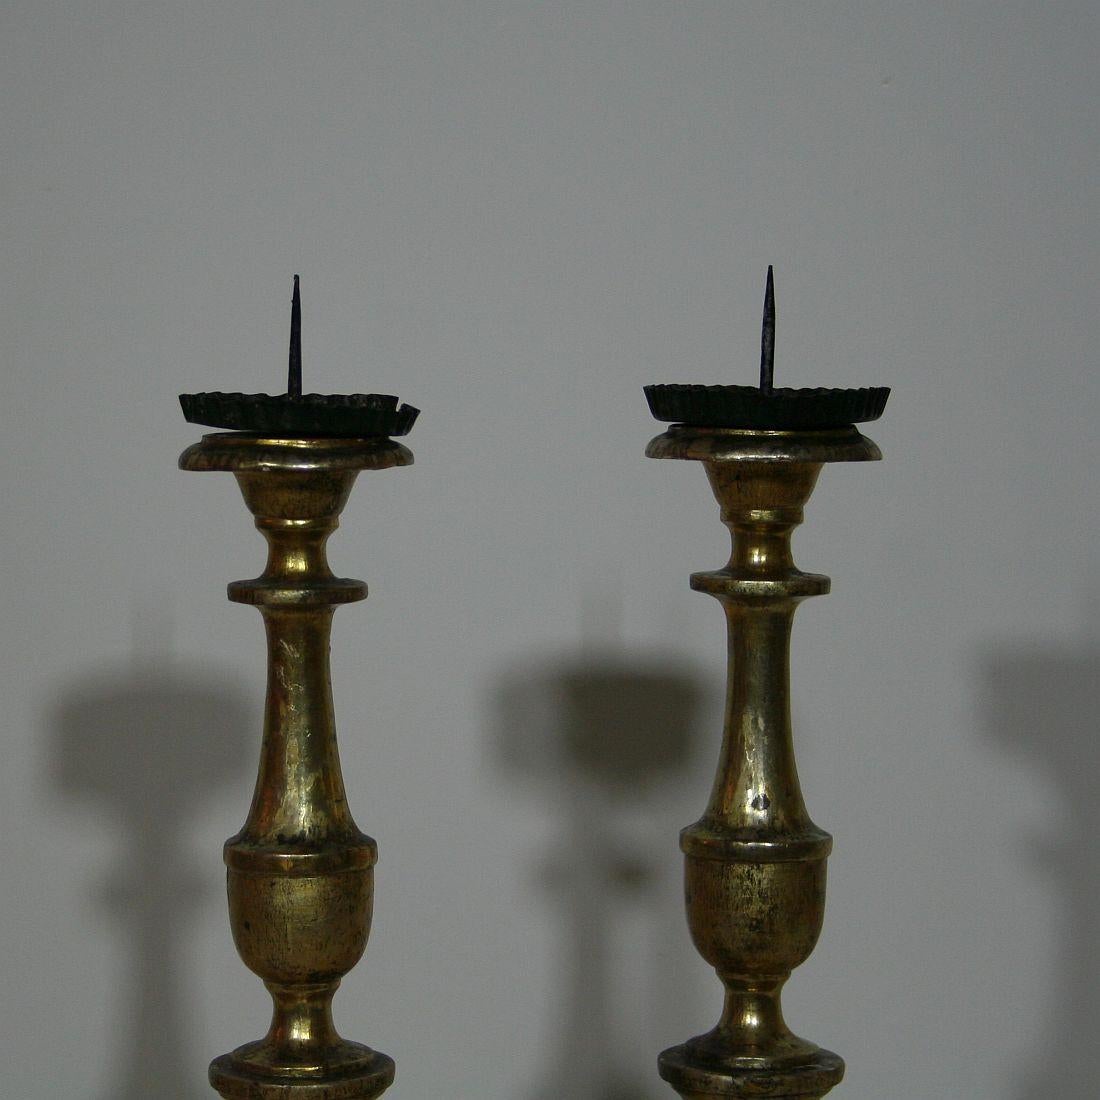 Pair of Late 18th-19th Century Italian Giltwood Candlesticks/ Candleholders 1